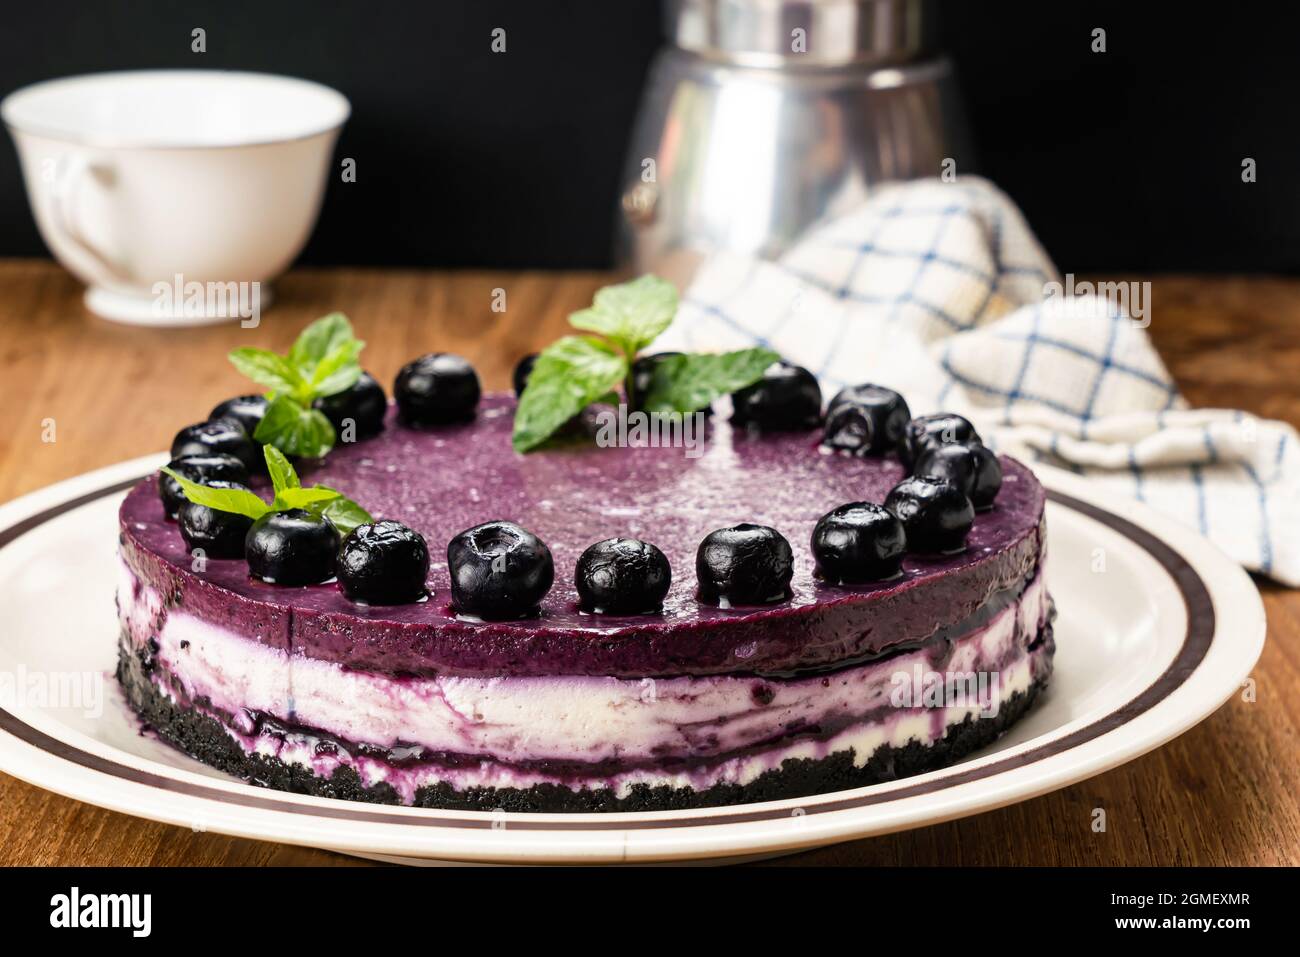 Homemade blueberry cheesecake garnished with preserved blueberry and mint leaf in brown ceramic dish with metal moka pot coffee maker and white coffee Stock Photo